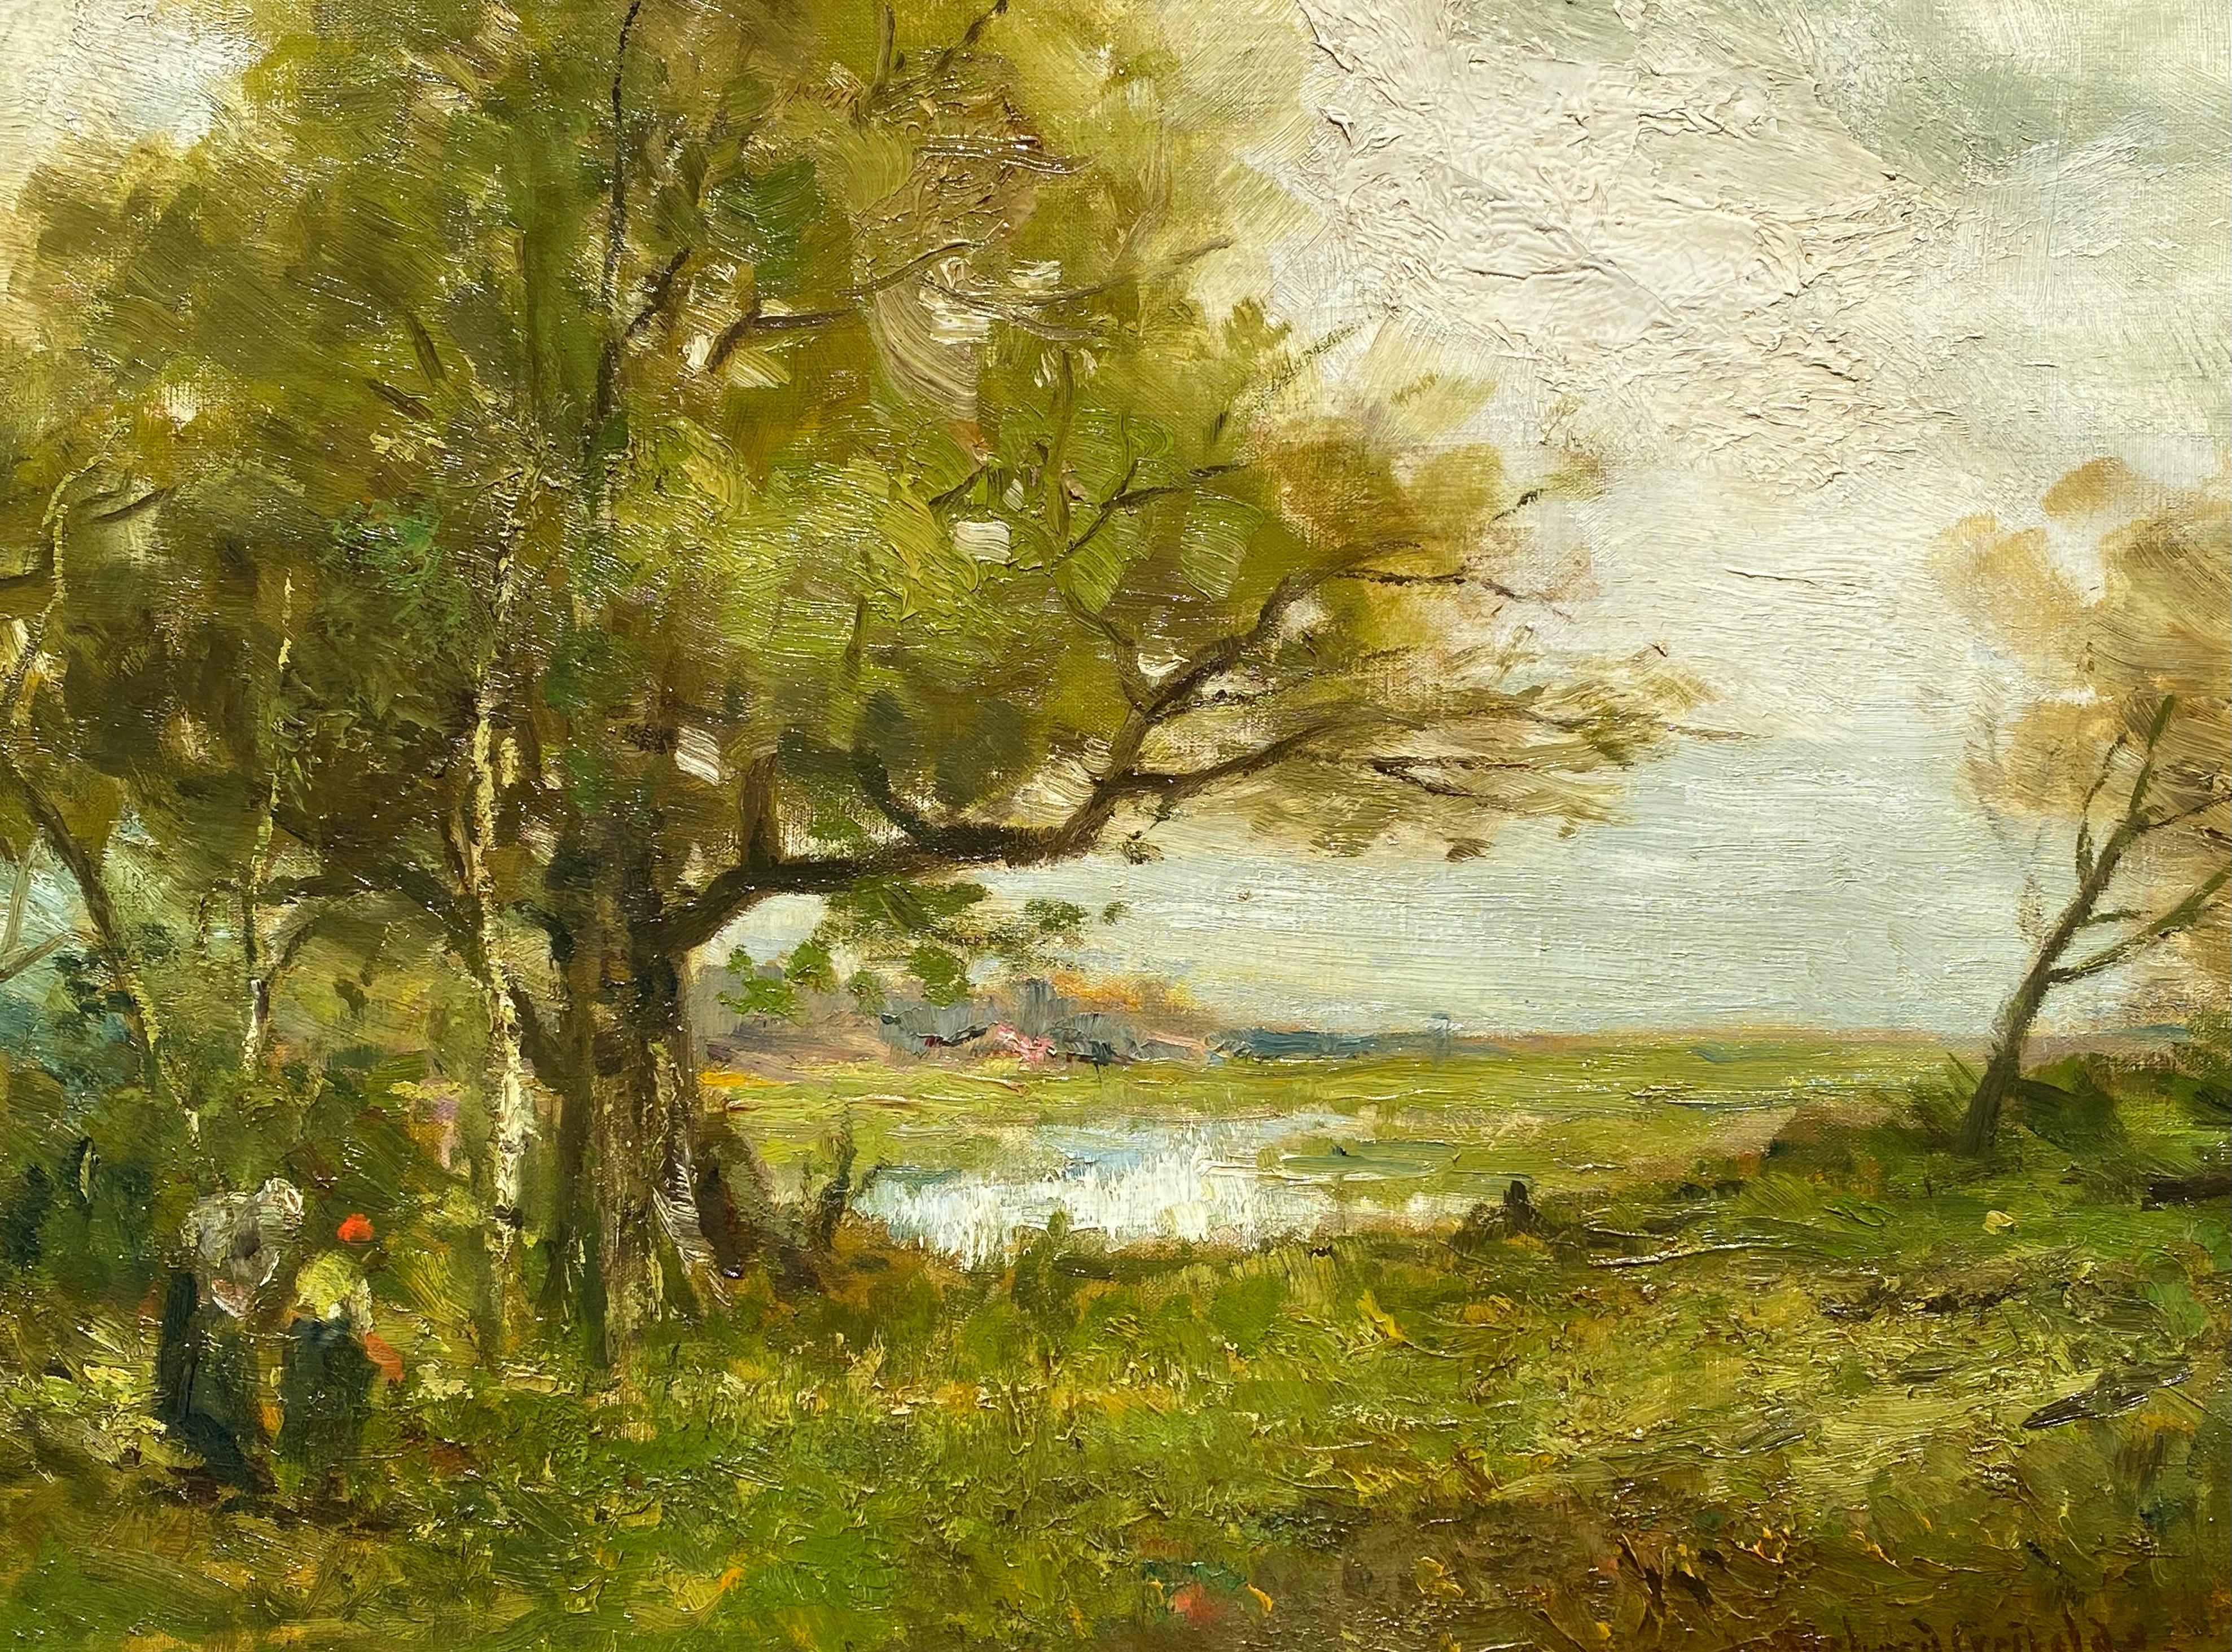 “Figures by the Pond” - American Impressionist Painting by Richard Creifelds